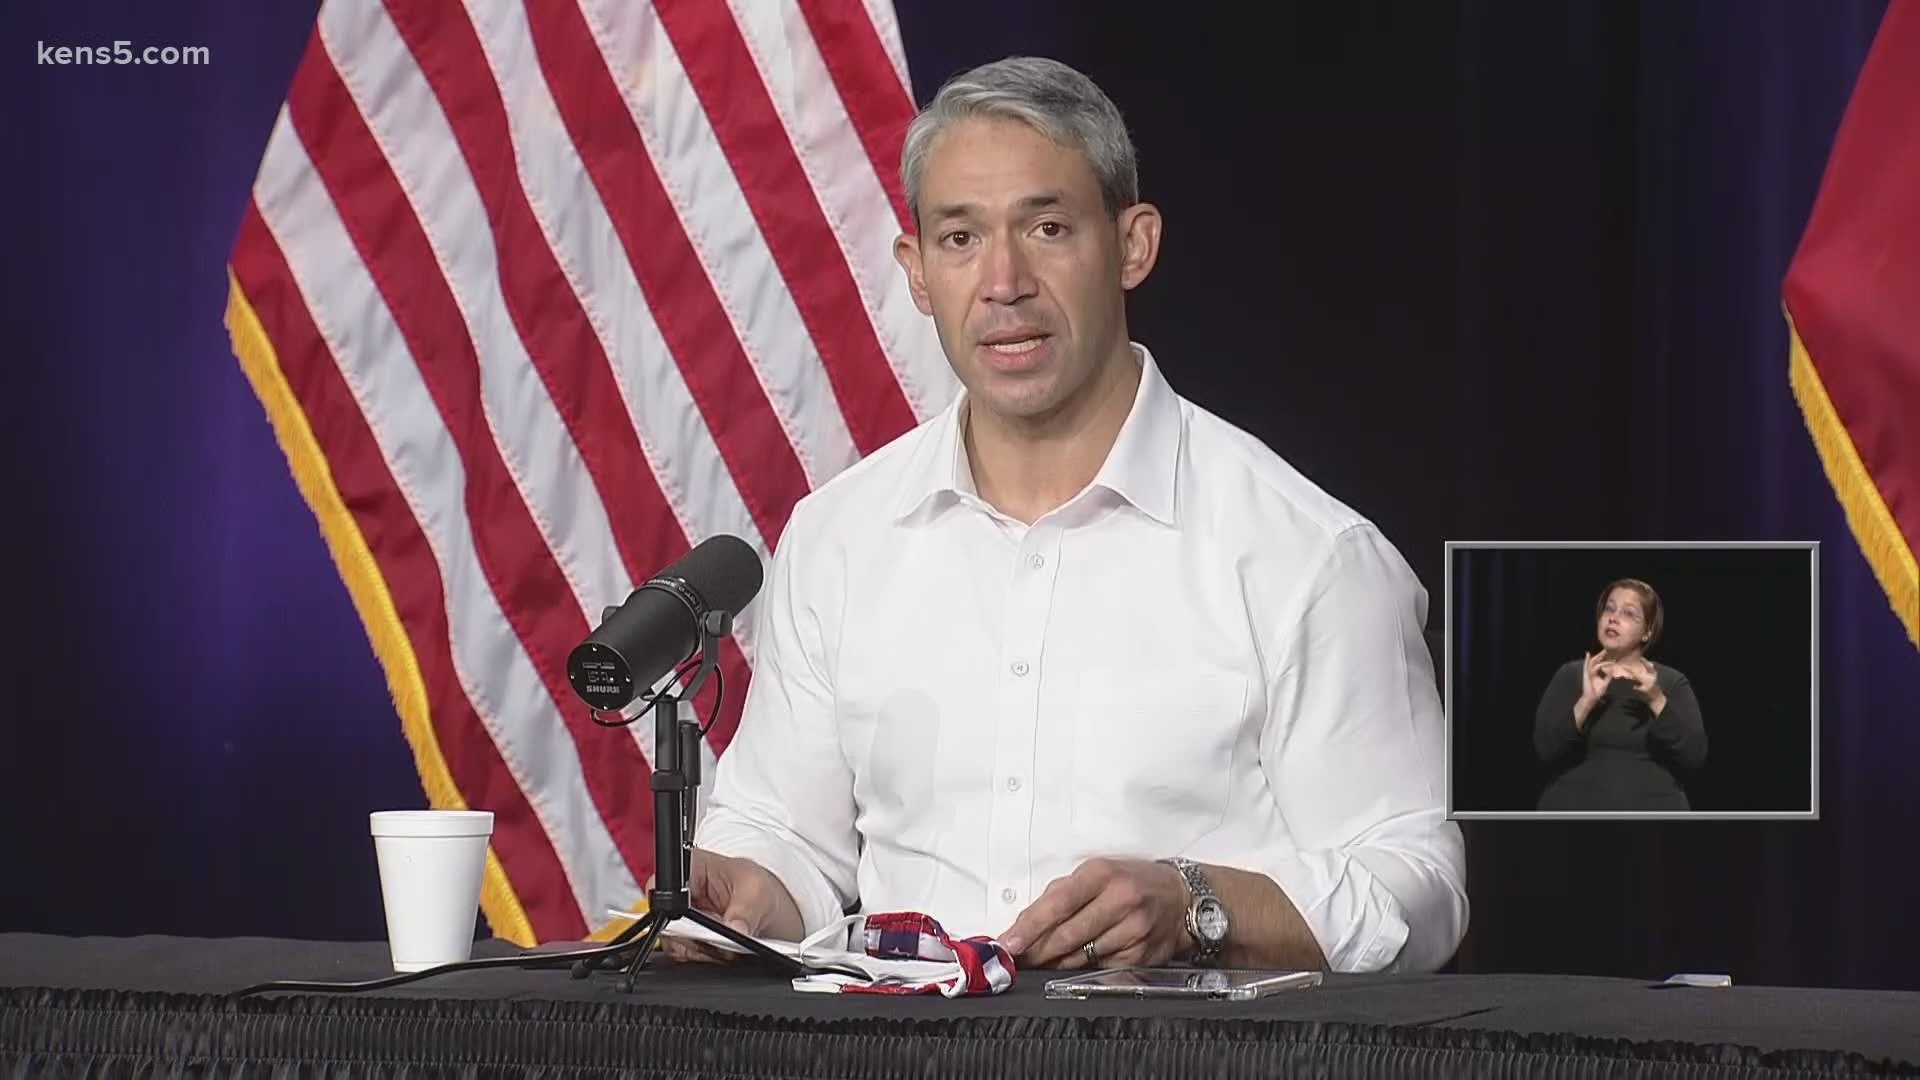 Mayor Nirenberg reported 551 new cases and 12 additional deaths on Tuesday.